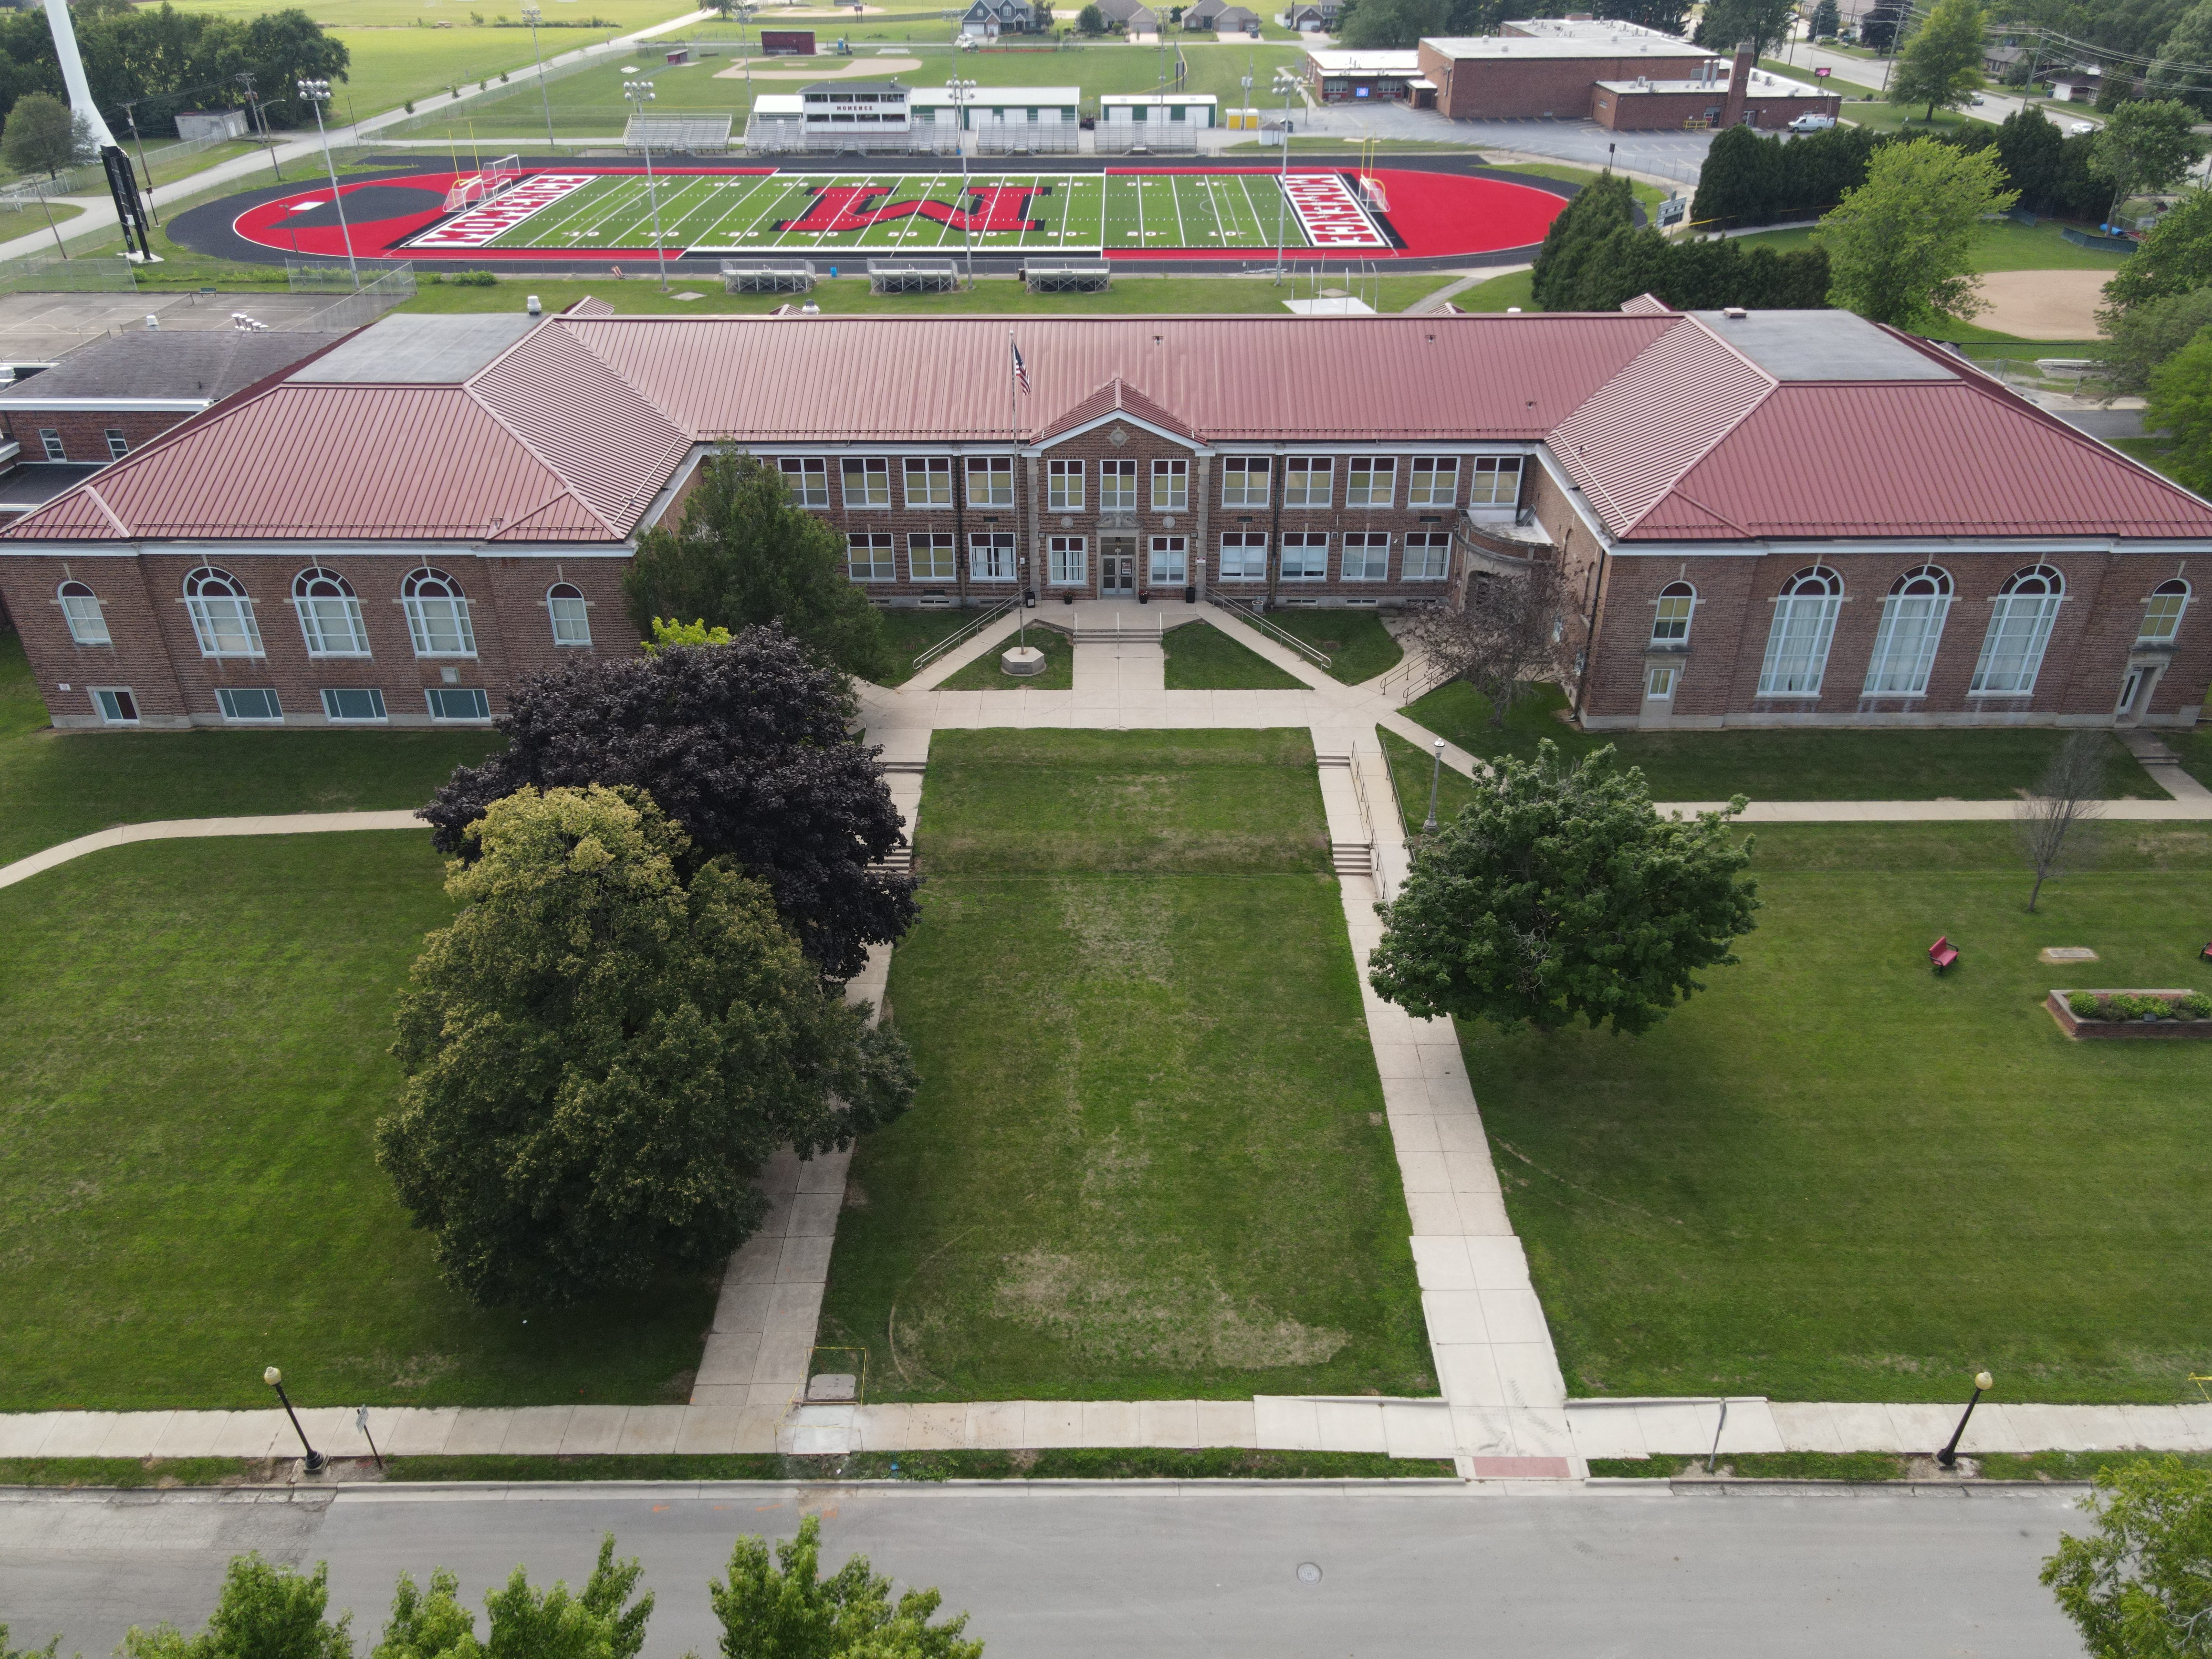 Aerial view of Momence High Schoo lwith athletic complex in the background